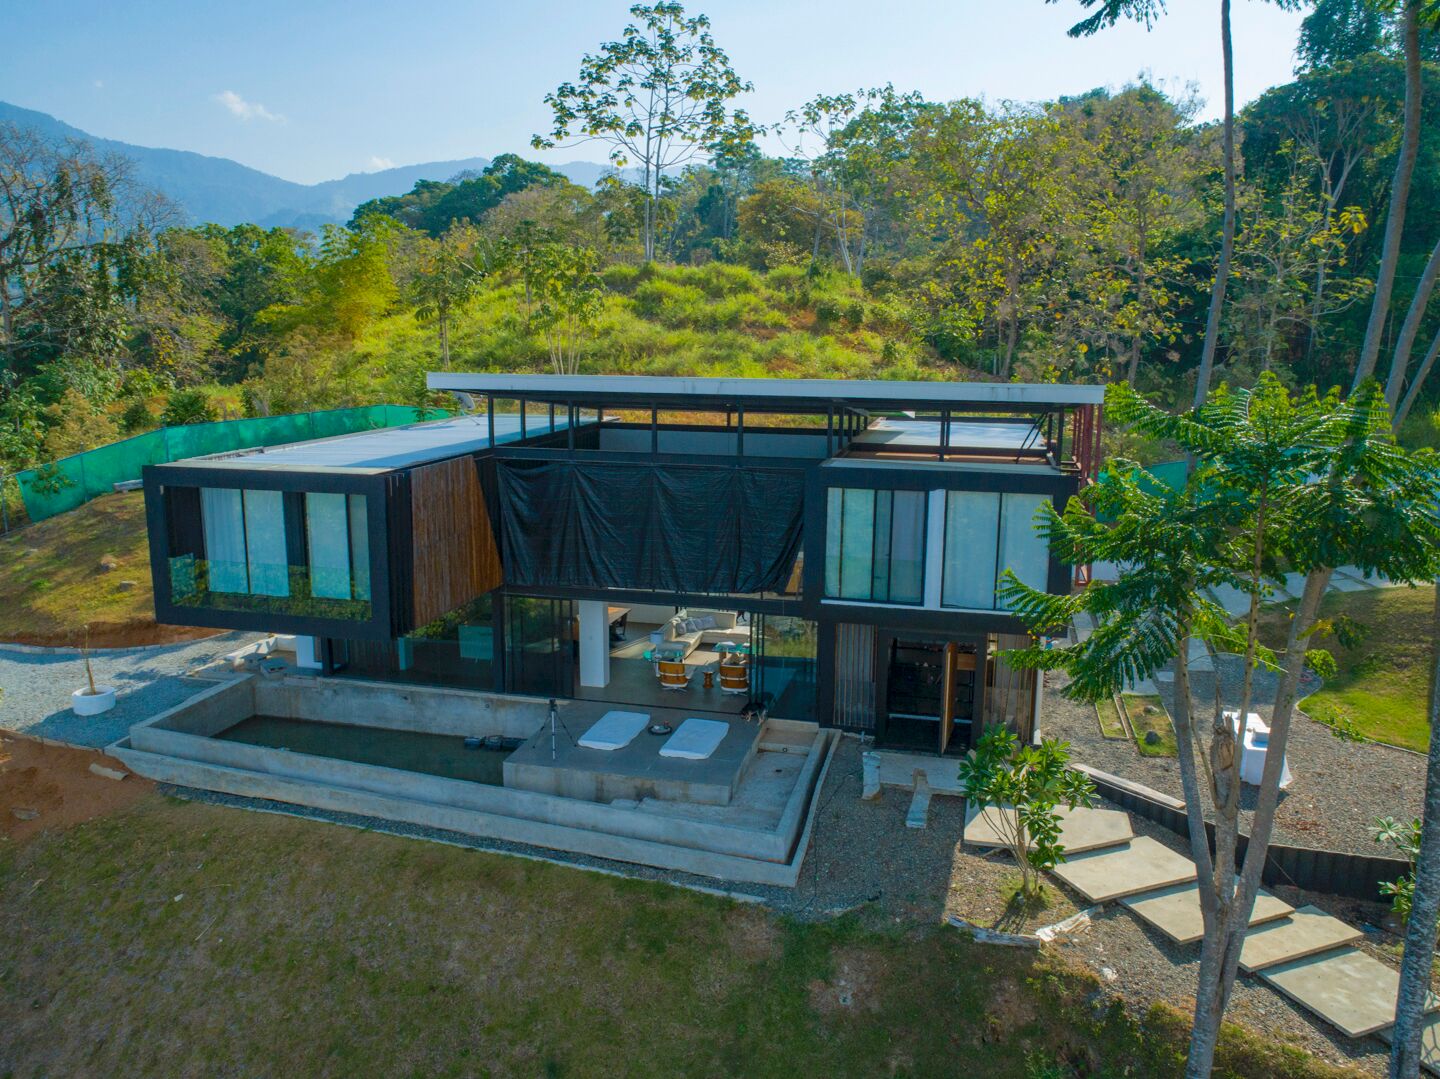 Modern Ocean View Home Built With Shipping Containers - Costa Rica